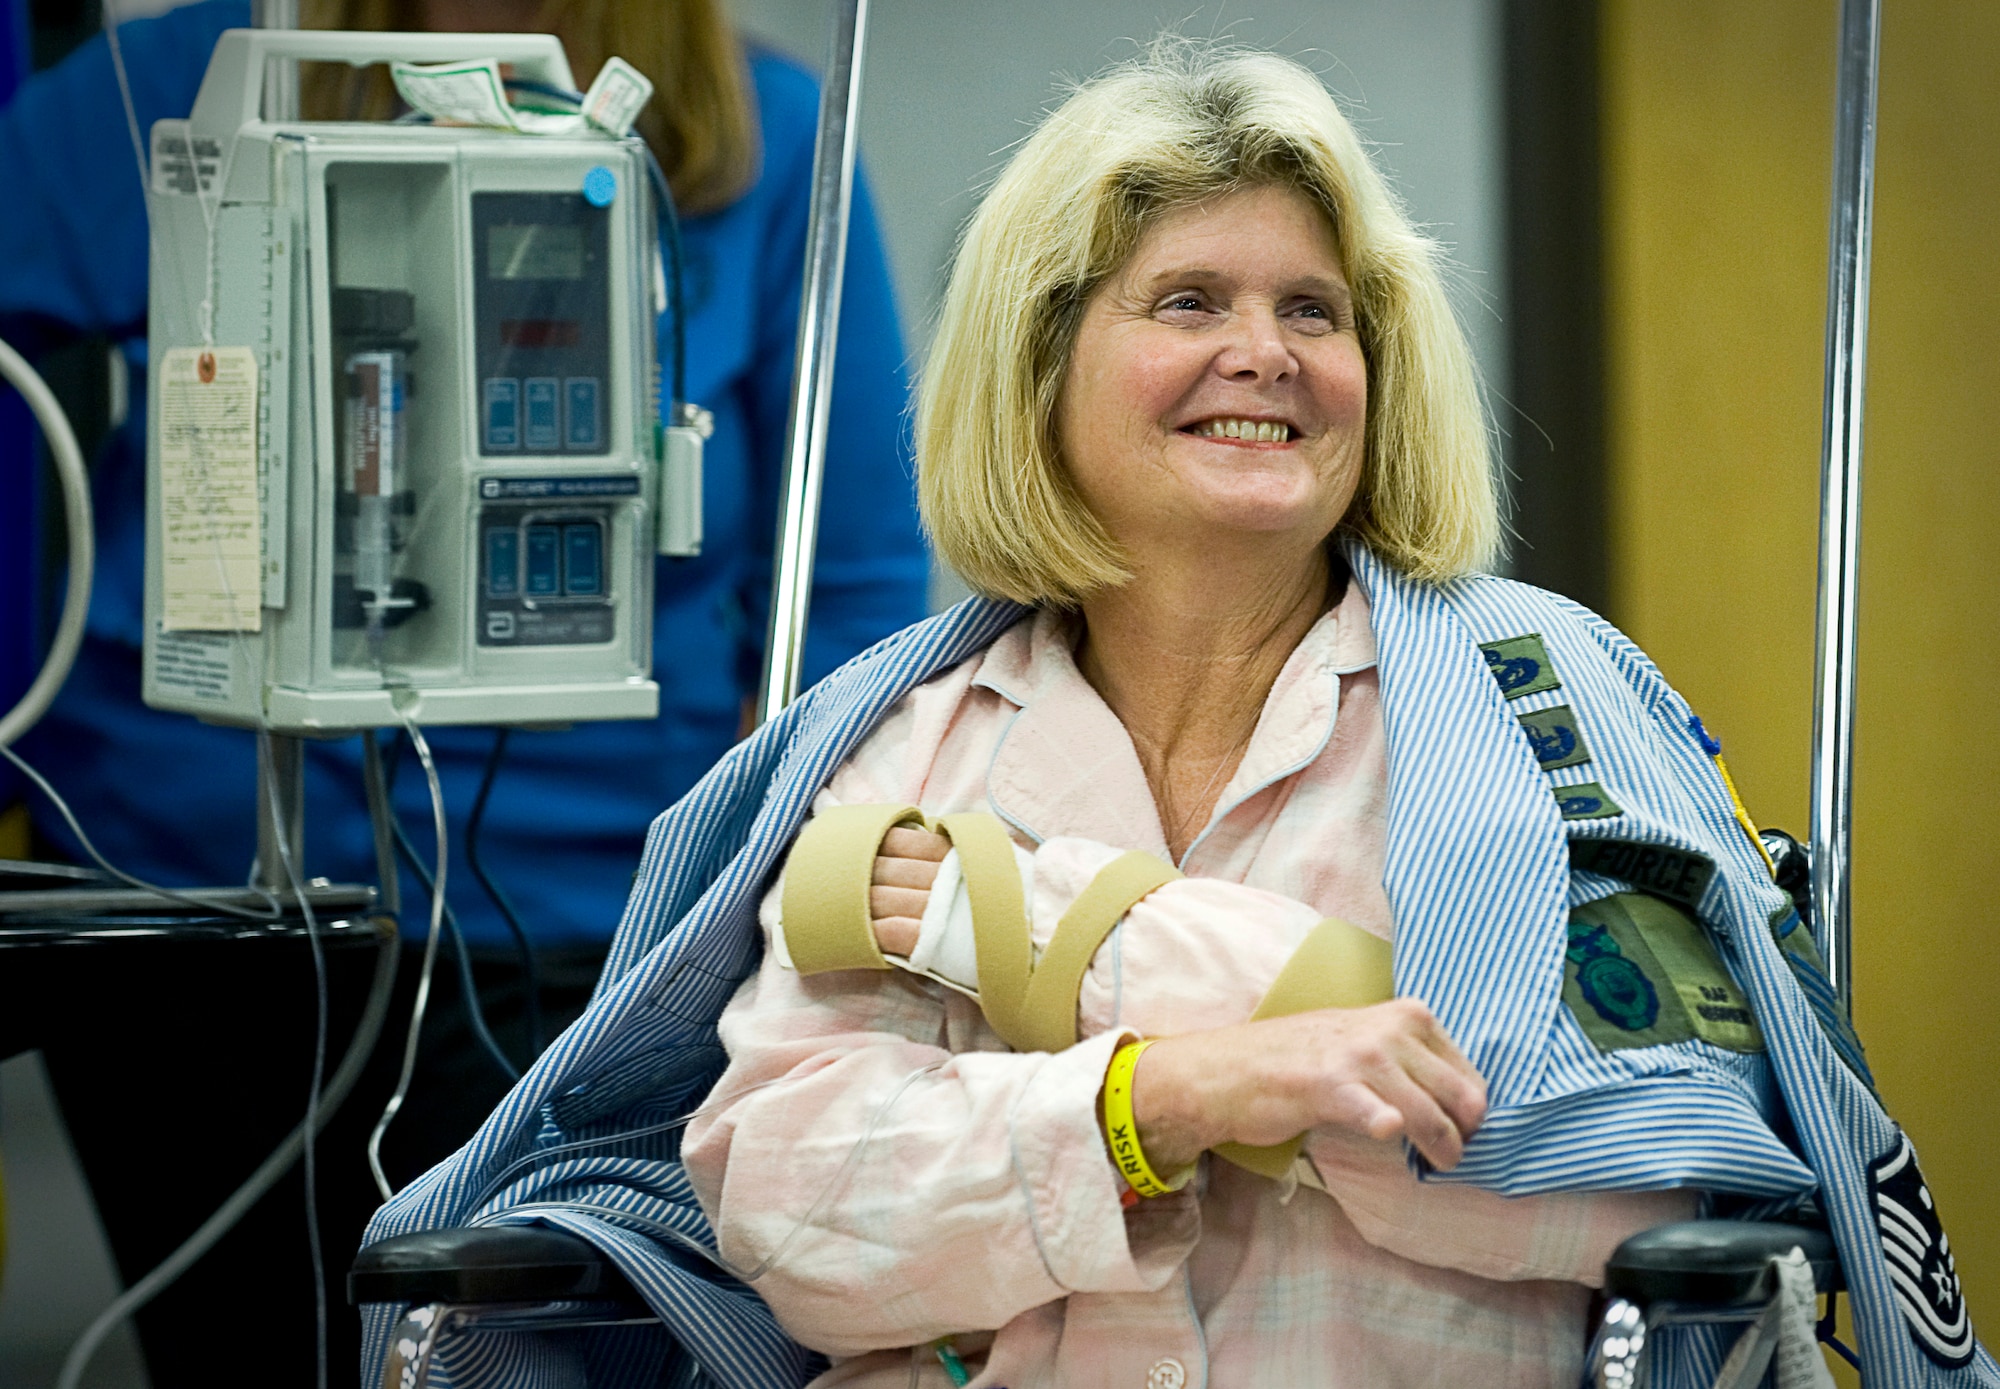 Retired Master Sgt. Janet McWilliams became the first female to undergo a hand transplant Feb. 17, 2010, at the Wilford Hall Medical Center, Texas. She is the 10th person to undergo the procedure in the U.S. and the first to have it done at a Defense Department facility. (U.S. Air Force photo/Staff Sgt. Bennie J. Davis III) 